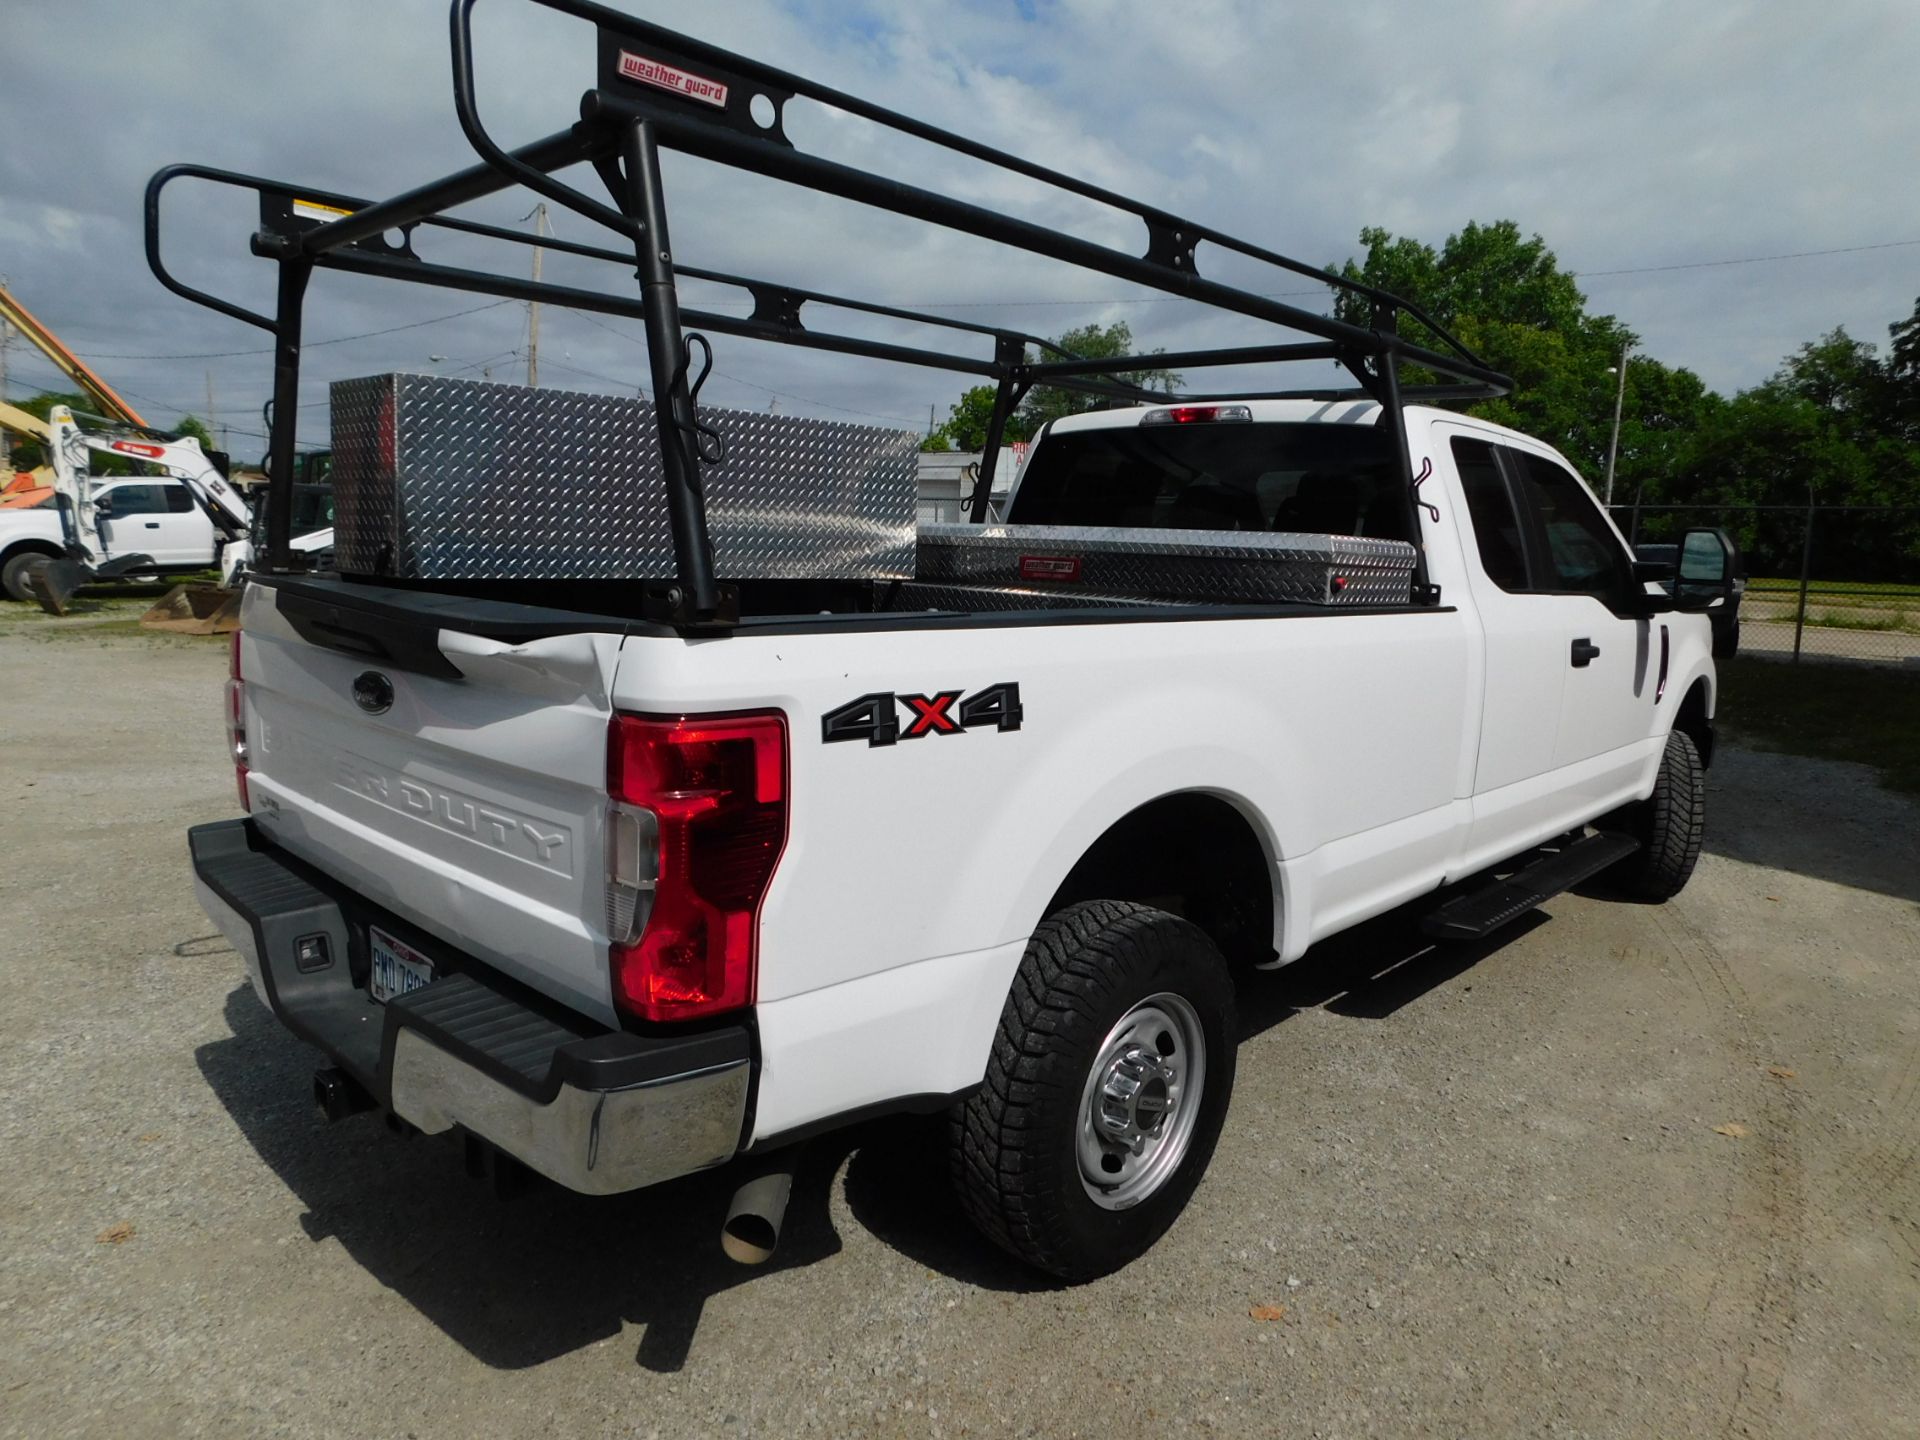 2020 Ford F-250 XL Etended Cab Pick-up Truck, Gas Engine, 4x4, PW, PL, AC, Trailer Brake Control, - Image 6 of 31